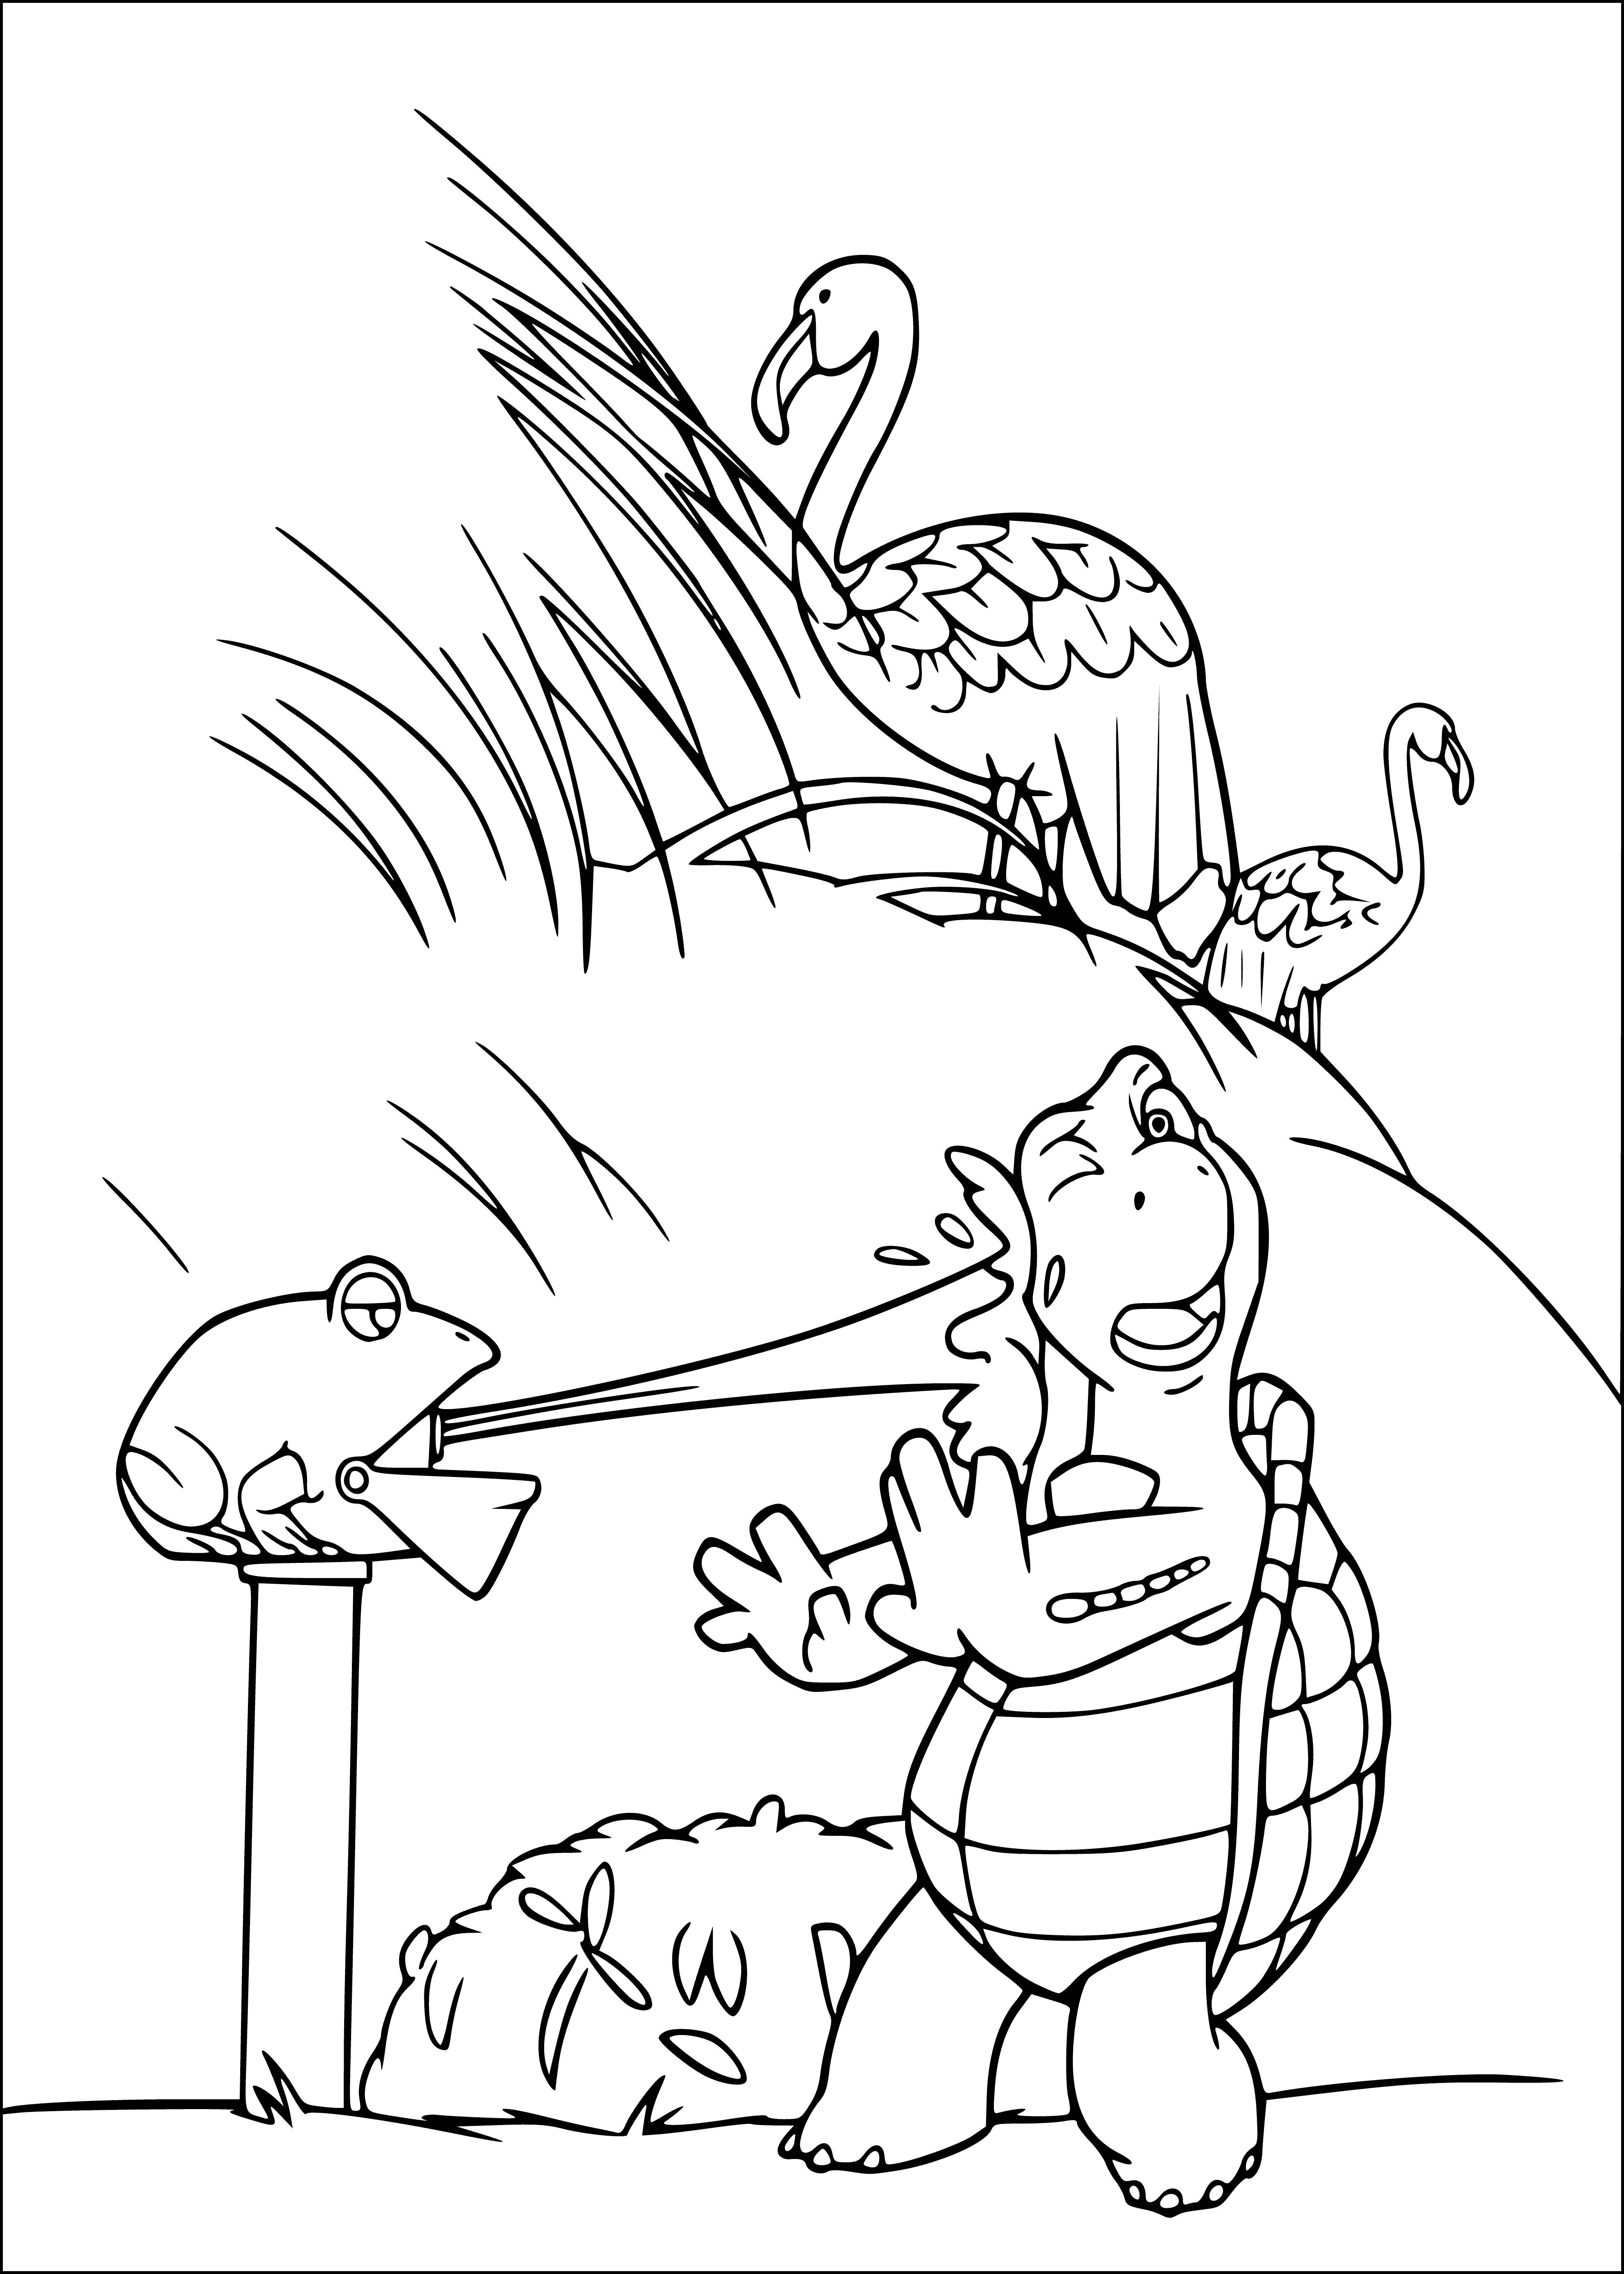 coloring page: Turtle on back with light brown shell and cream stomach, mouth open, eyes closed. Facing left of page.